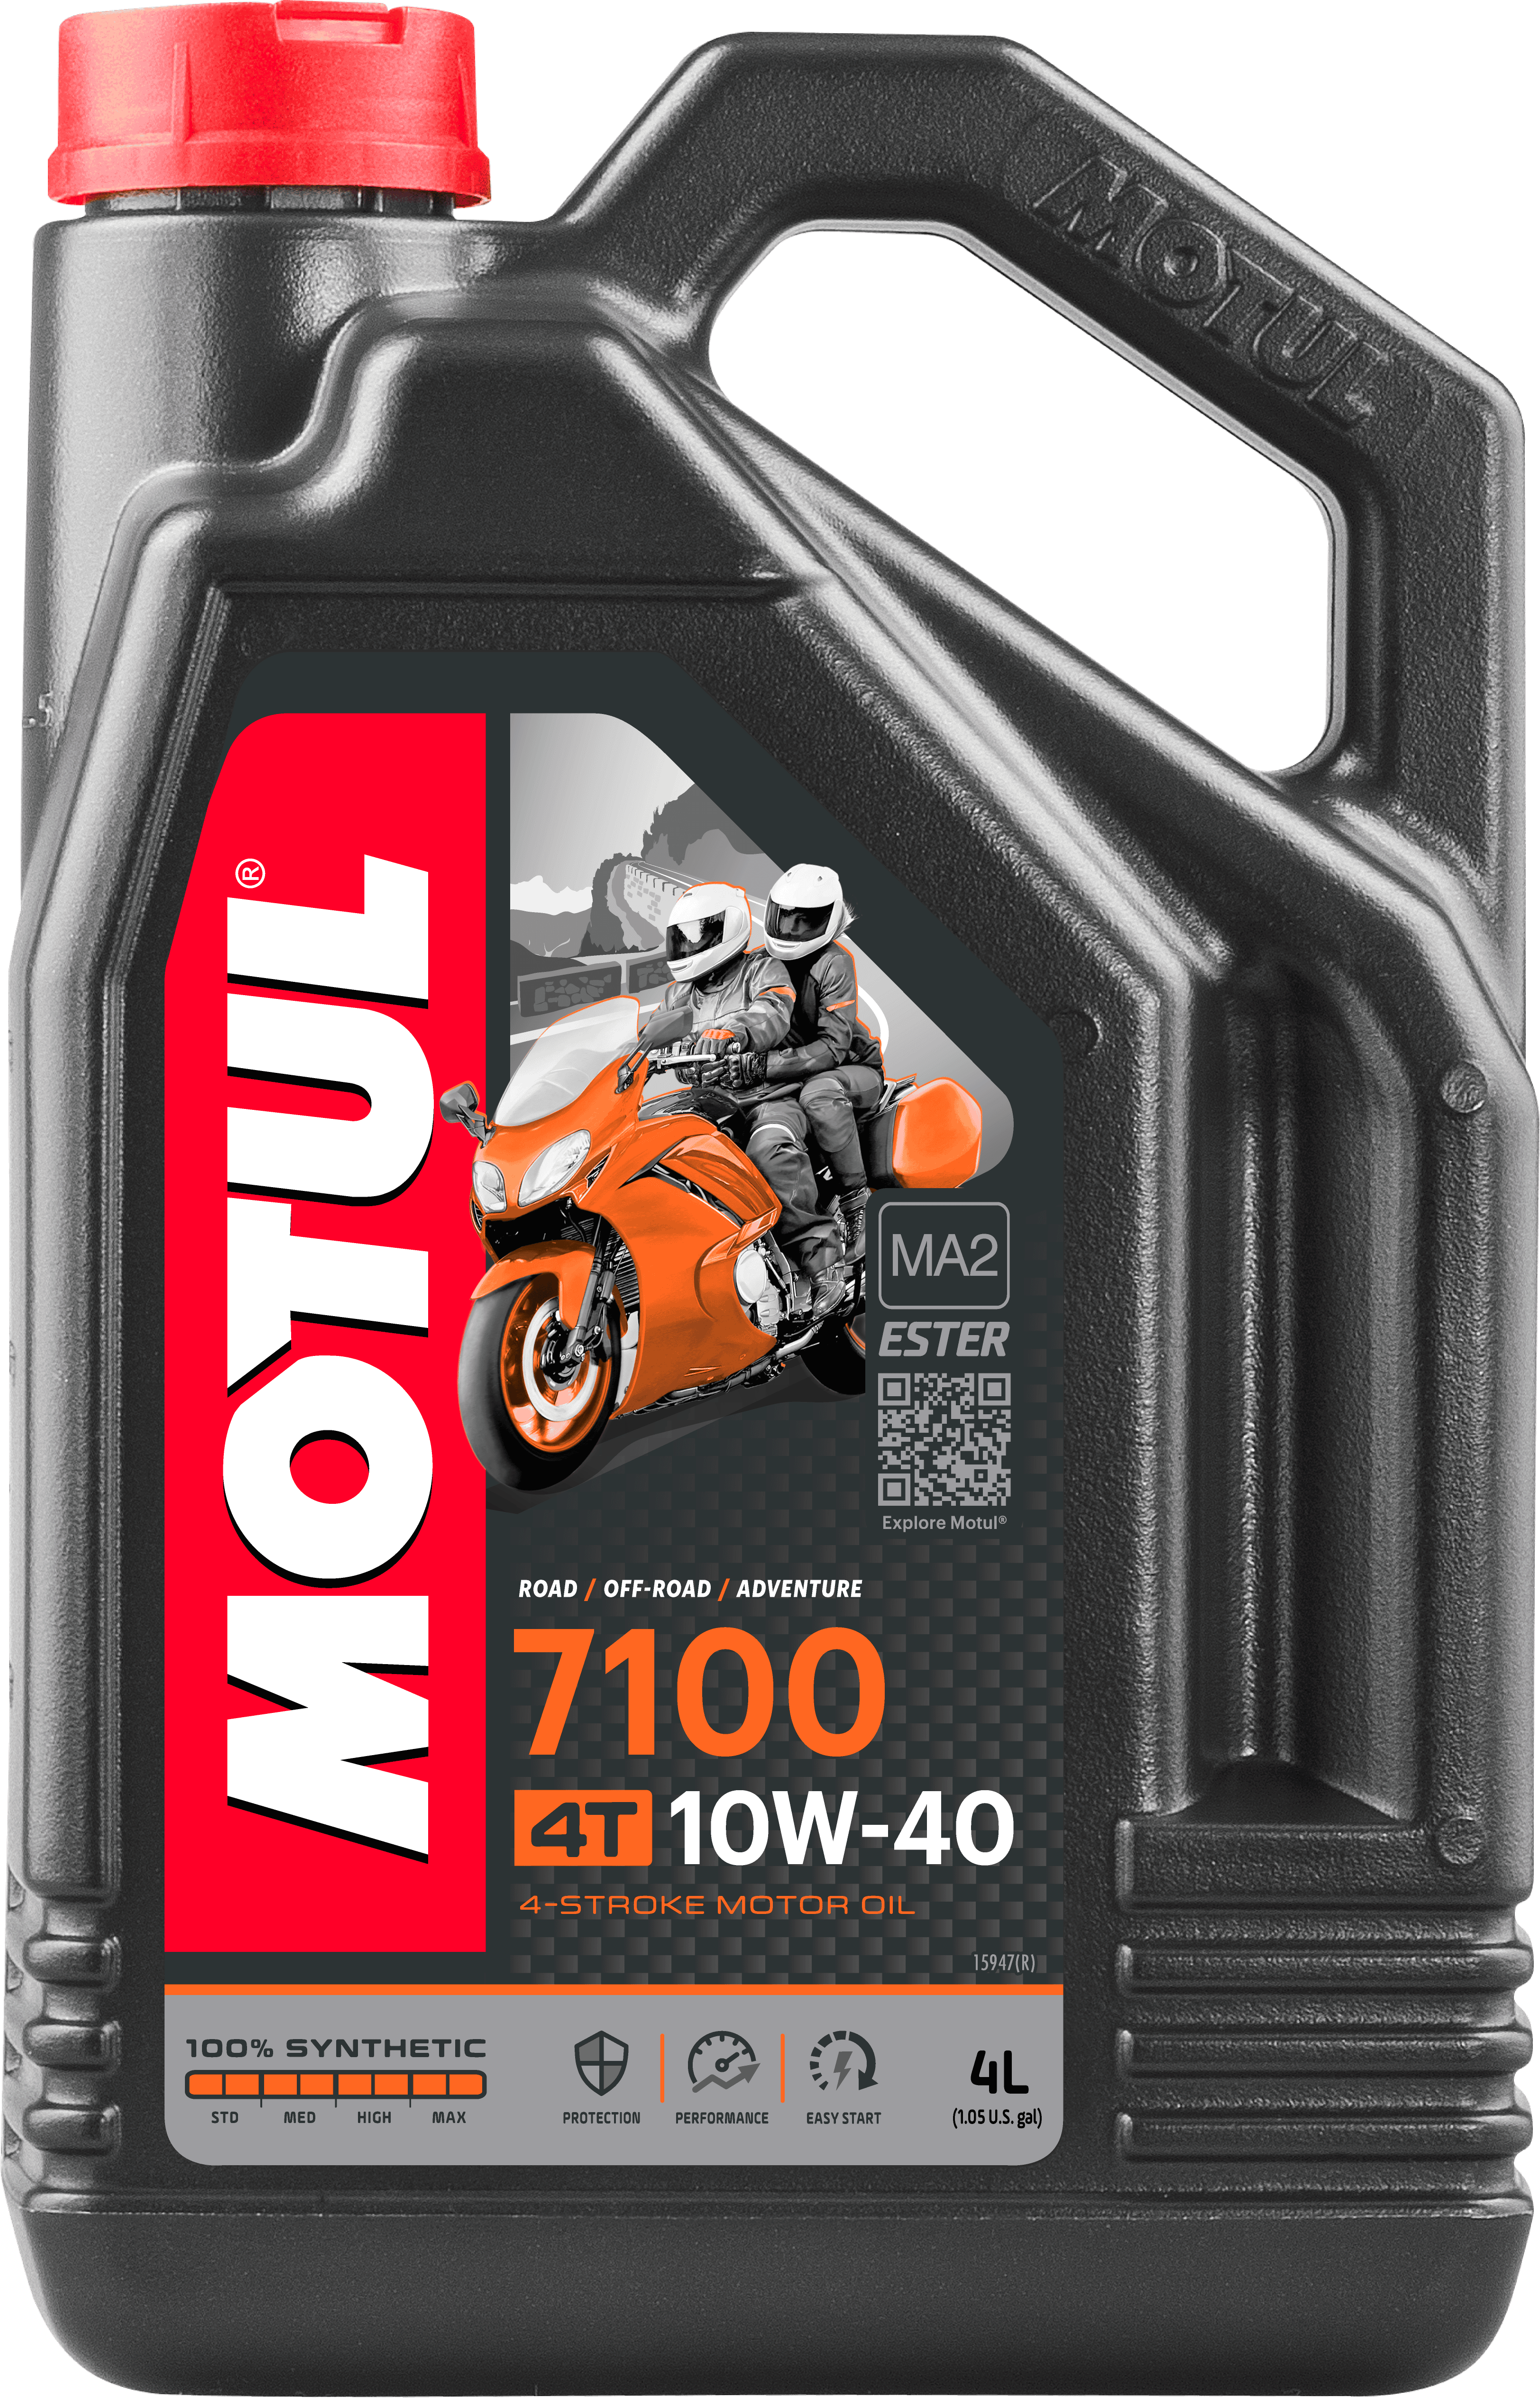 Motul : engine oils, lubricants, car and motorcycle care